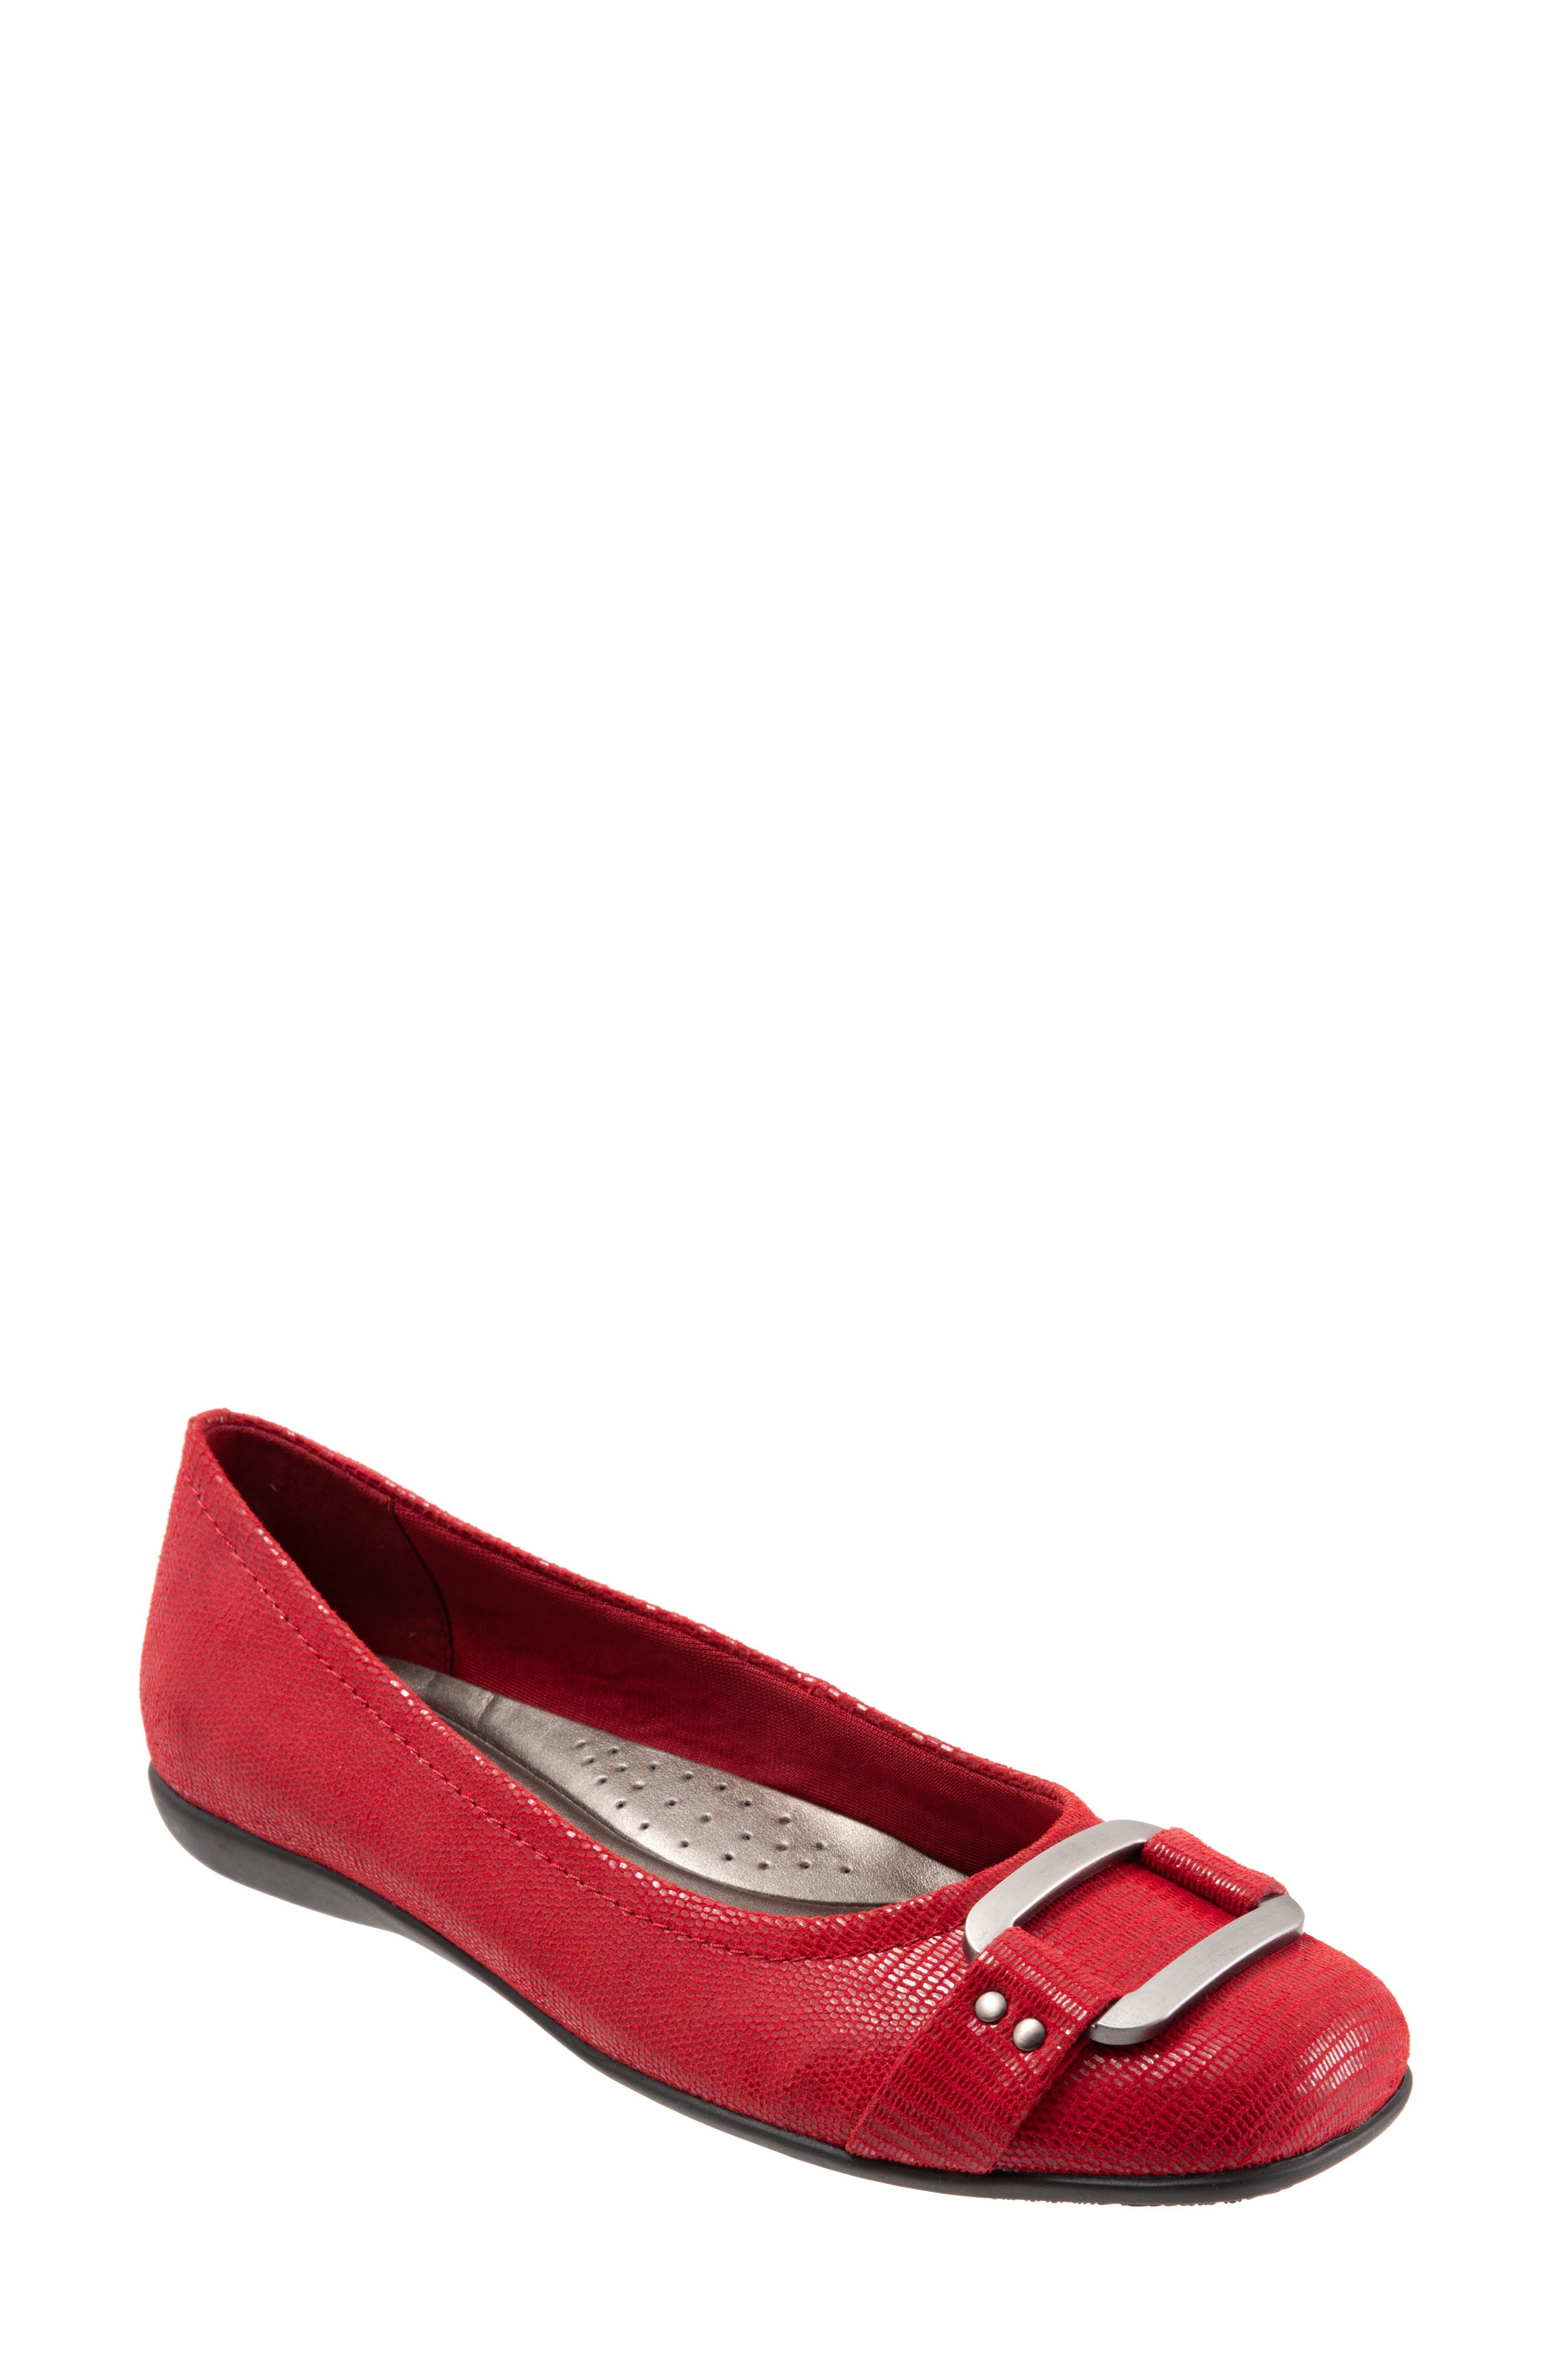 red flats nordstrom